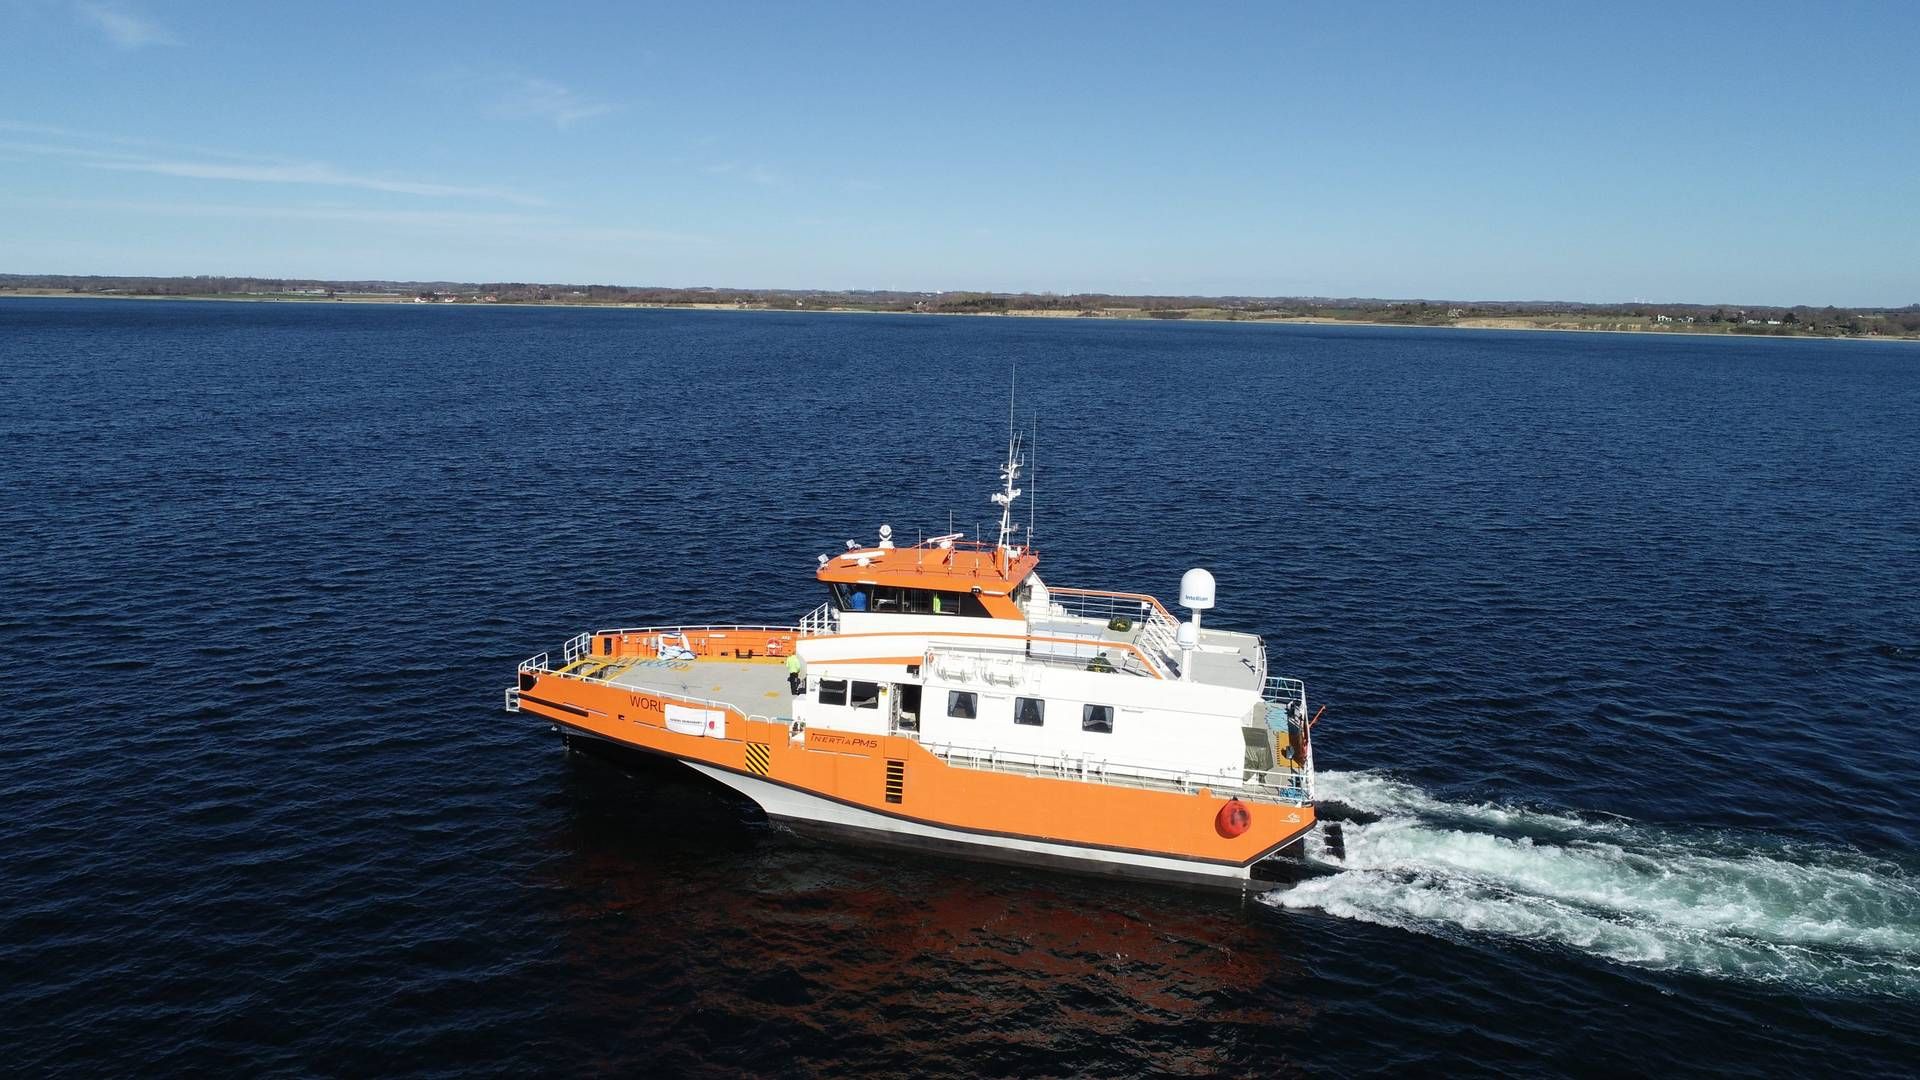 World Marine Offshore managed a fleet of smaller vessels used to transport crew to offshore wind farms. When the company went bankrupt, most vessels lay inactive in the Port of Esbjerg, though. | Photo: World Marine Offshore